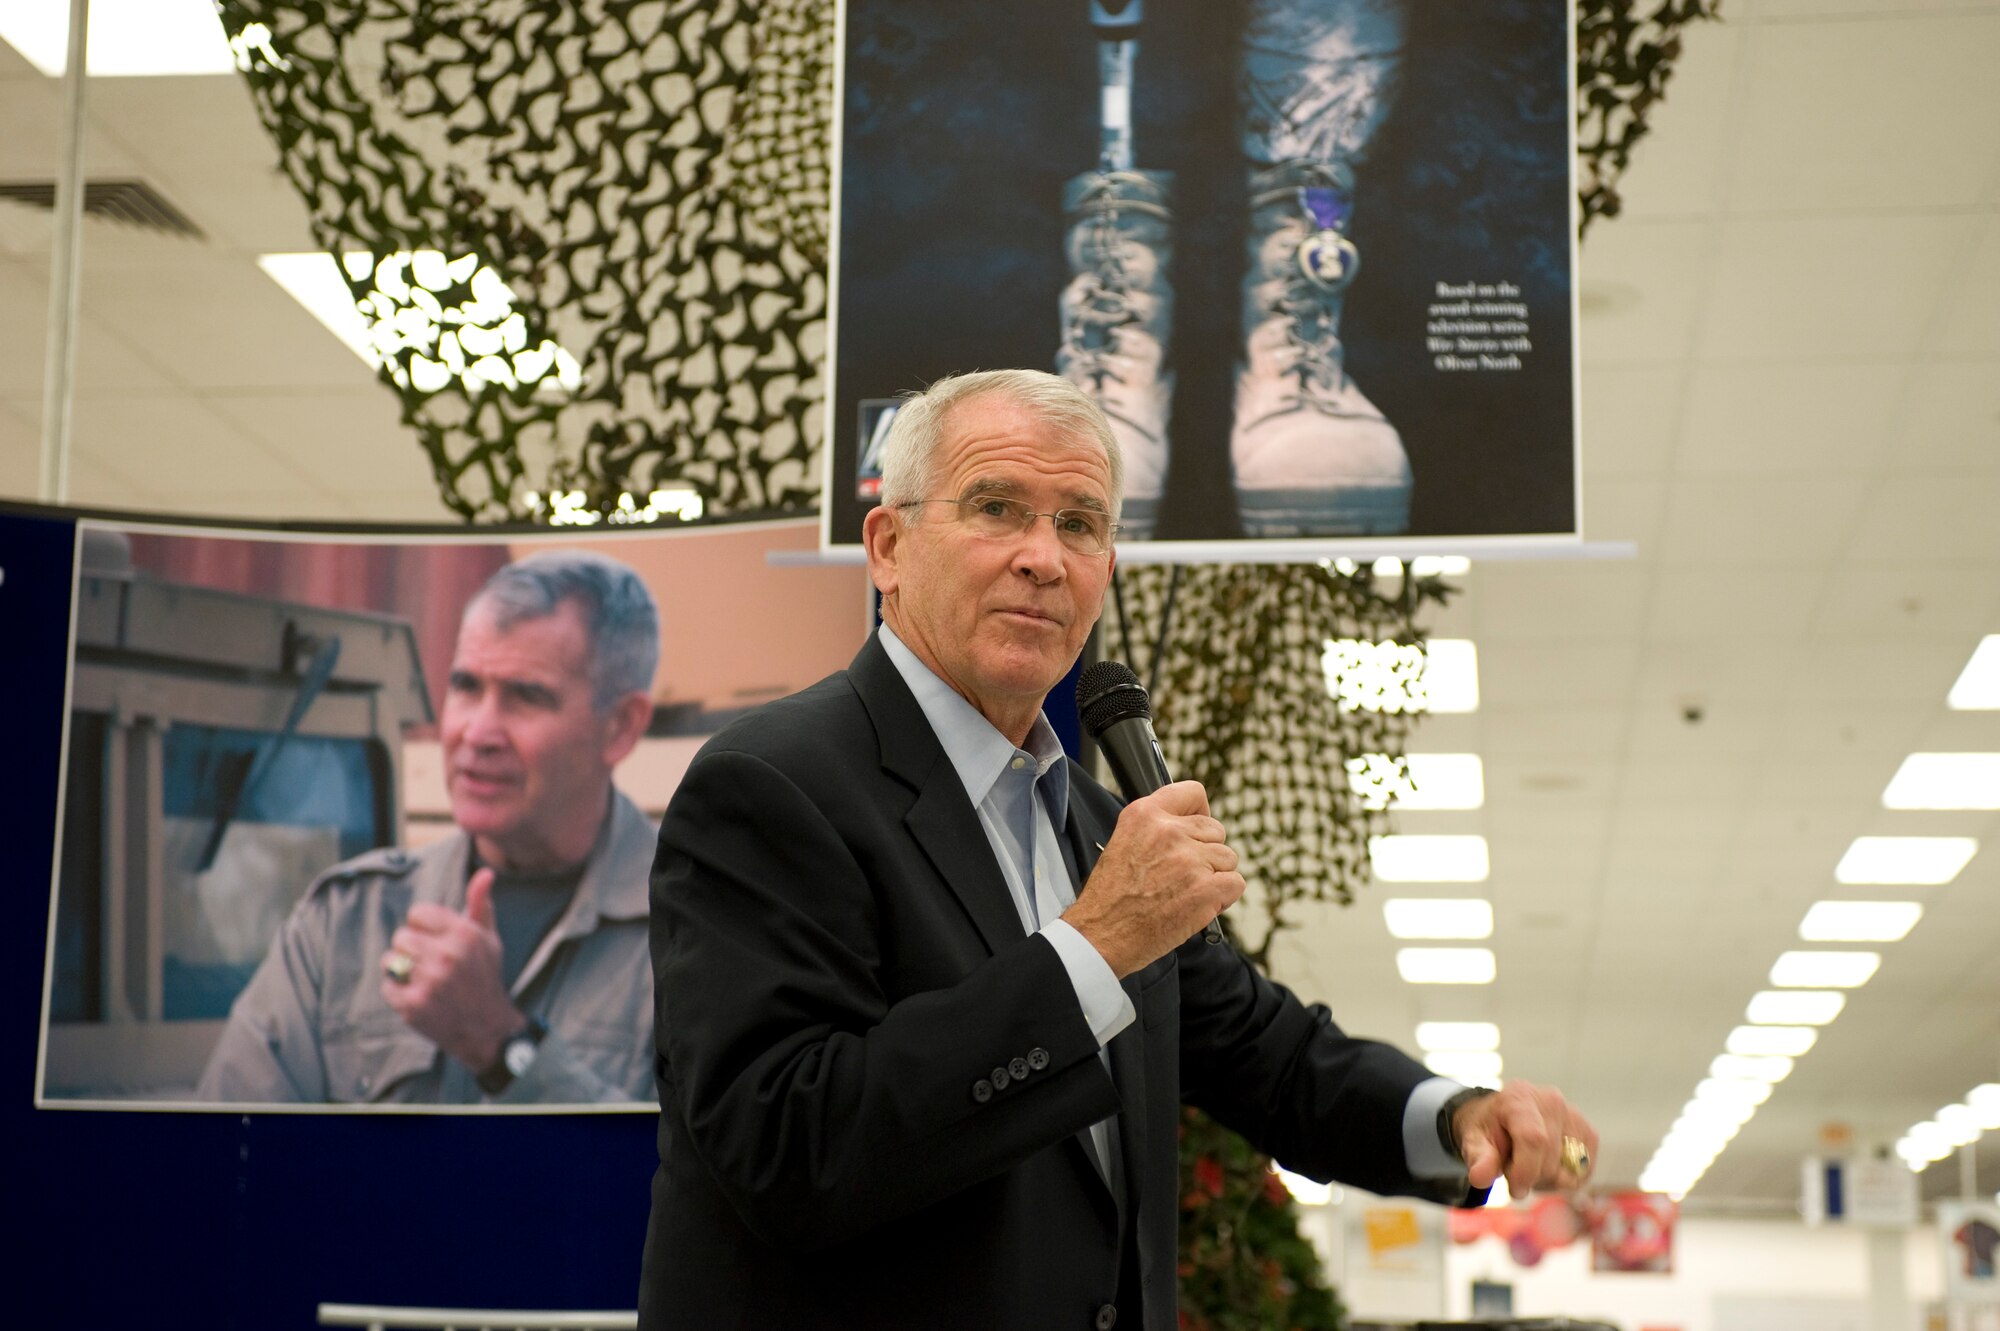 Oliver North, speaks to fans at the Exchange during a book signing Nov. 9, 2013, at Nellis Air Force Base, Nev. North signed autographs for his book “American Heroes, On the Homefront” during his visit to Nellis AFB. North is currently the host of “War Stories with Oliver North” on the Fox News Channel. (U.S. Air Force photo by Airman 1st Class Christopher Tam)